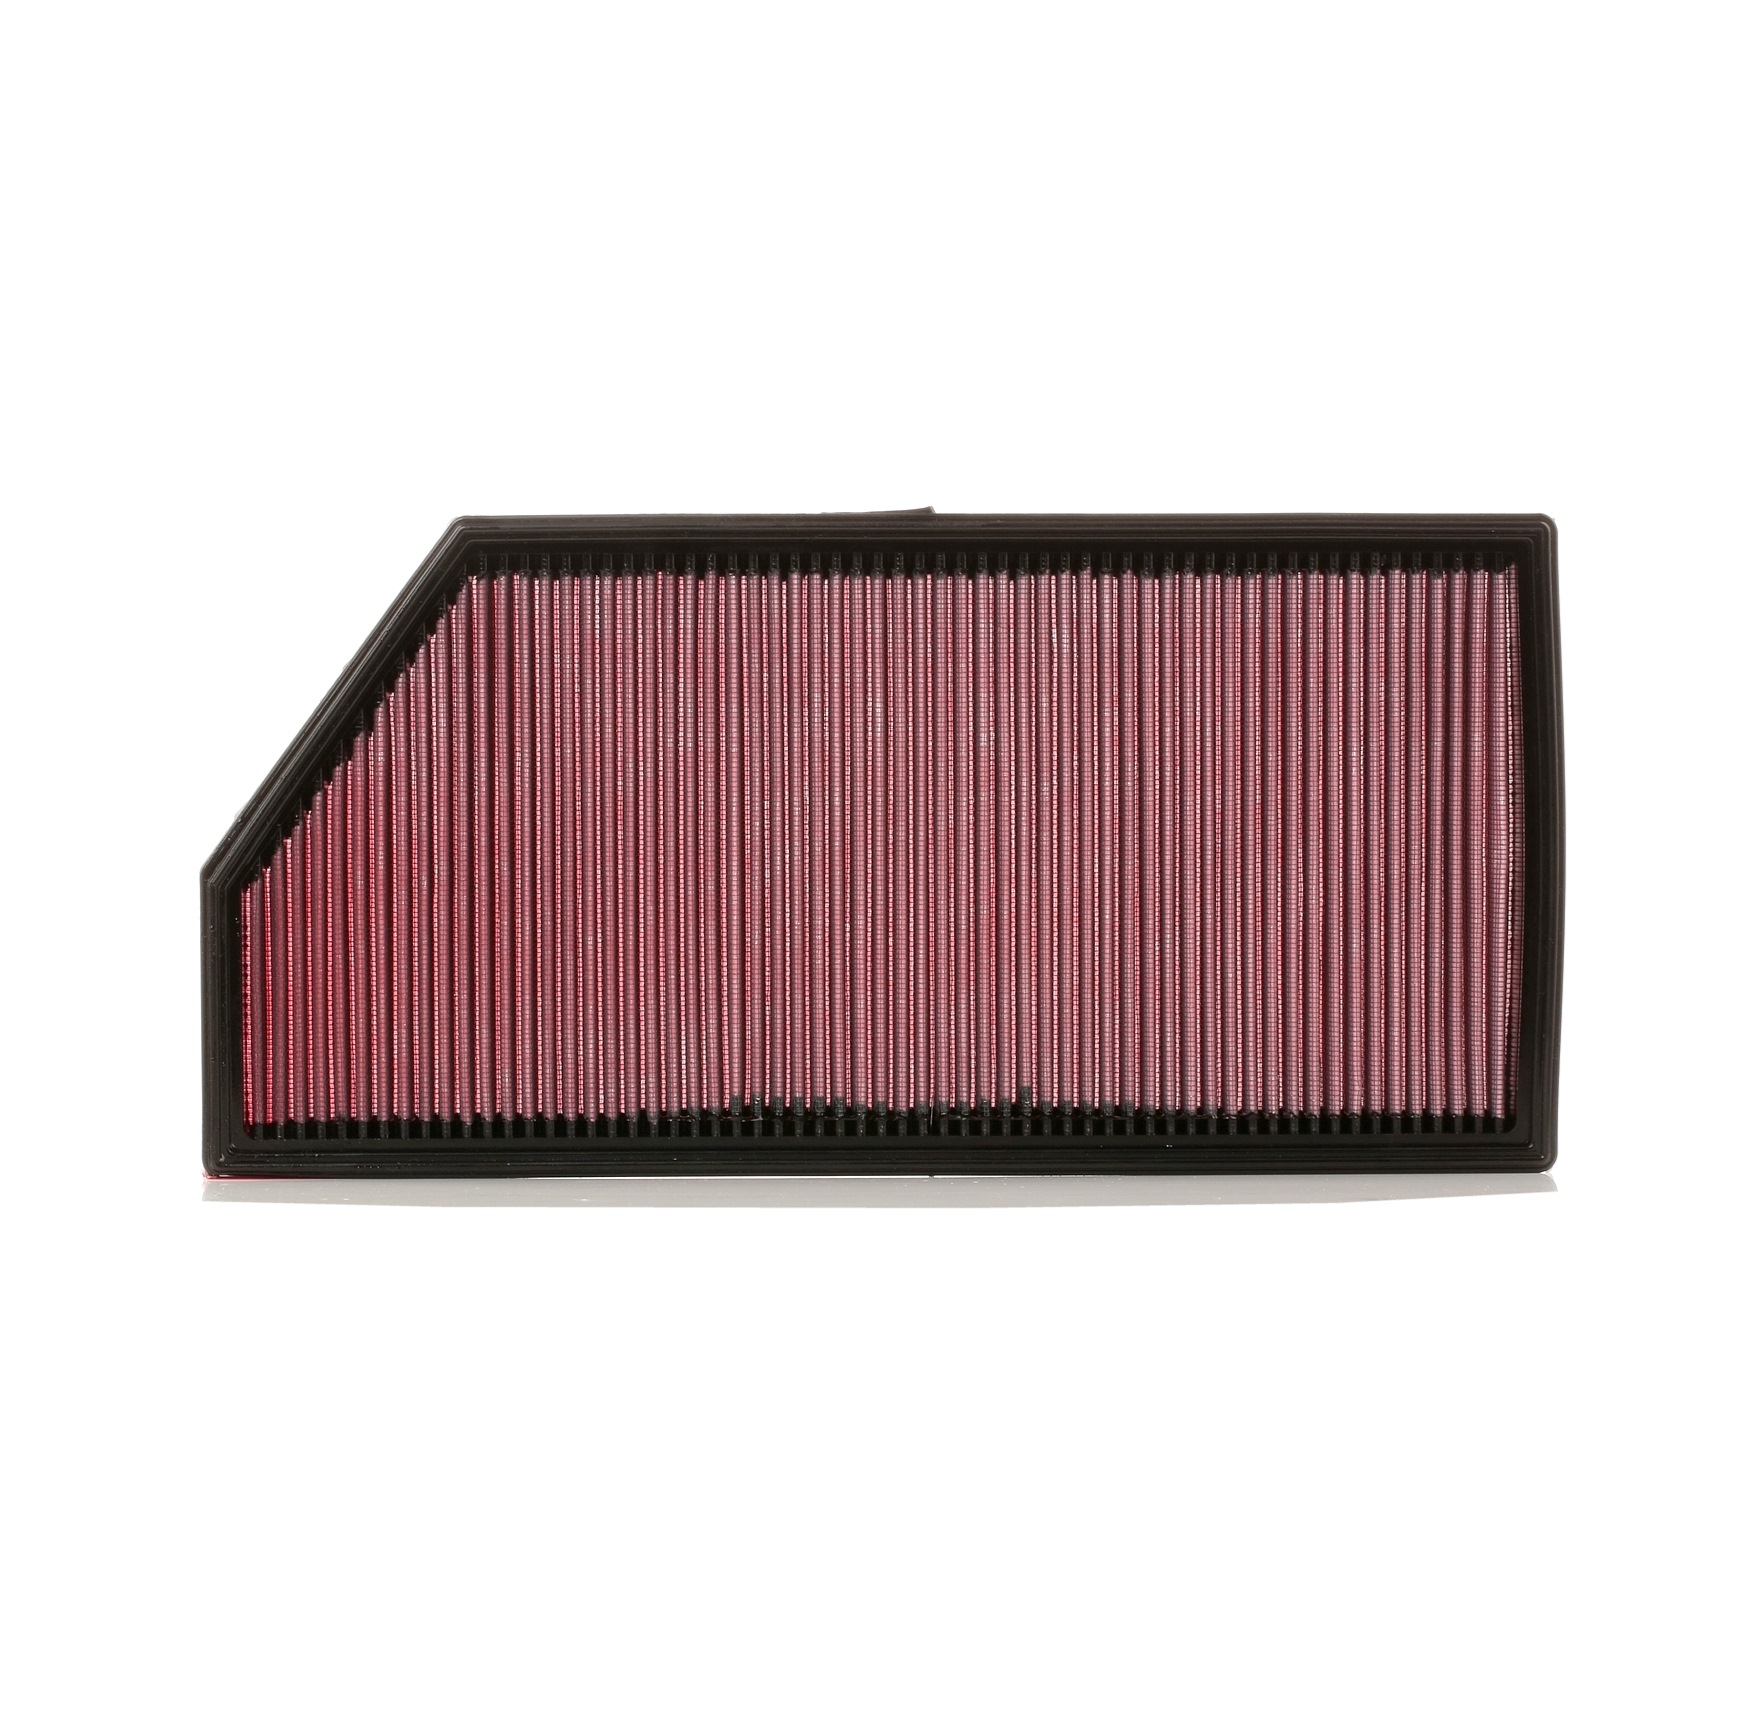 K&N Filters 25mm, 200mm, 408mm, Square, Long-life Filter Length: 408mm, Width: 200mm, Height: 25mm Engine air filter 33-3068 buy